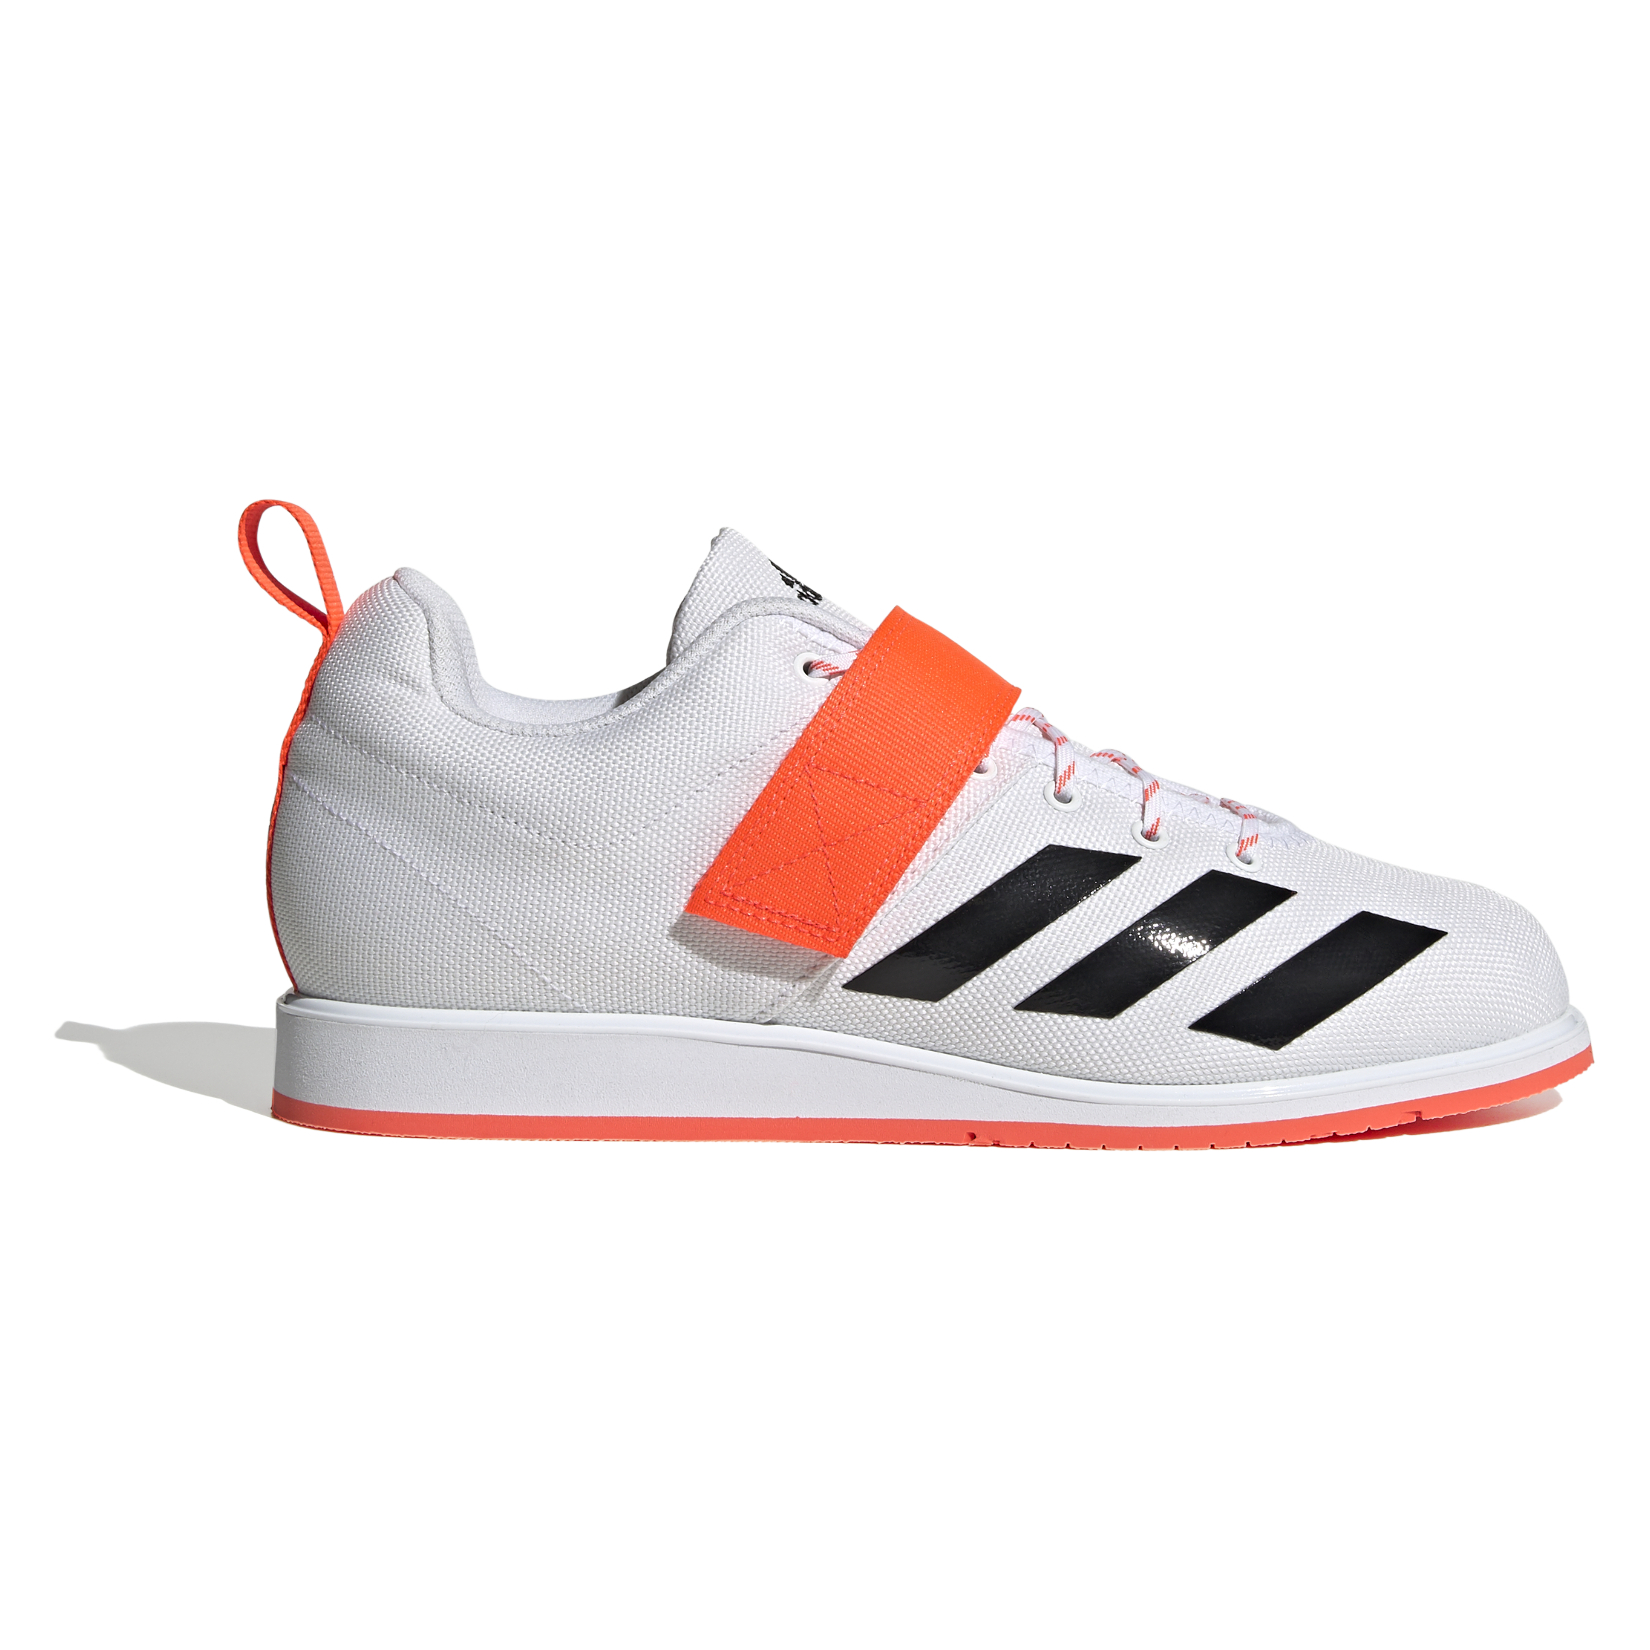 adidas-LP Powerlift Weightlifting Shoes